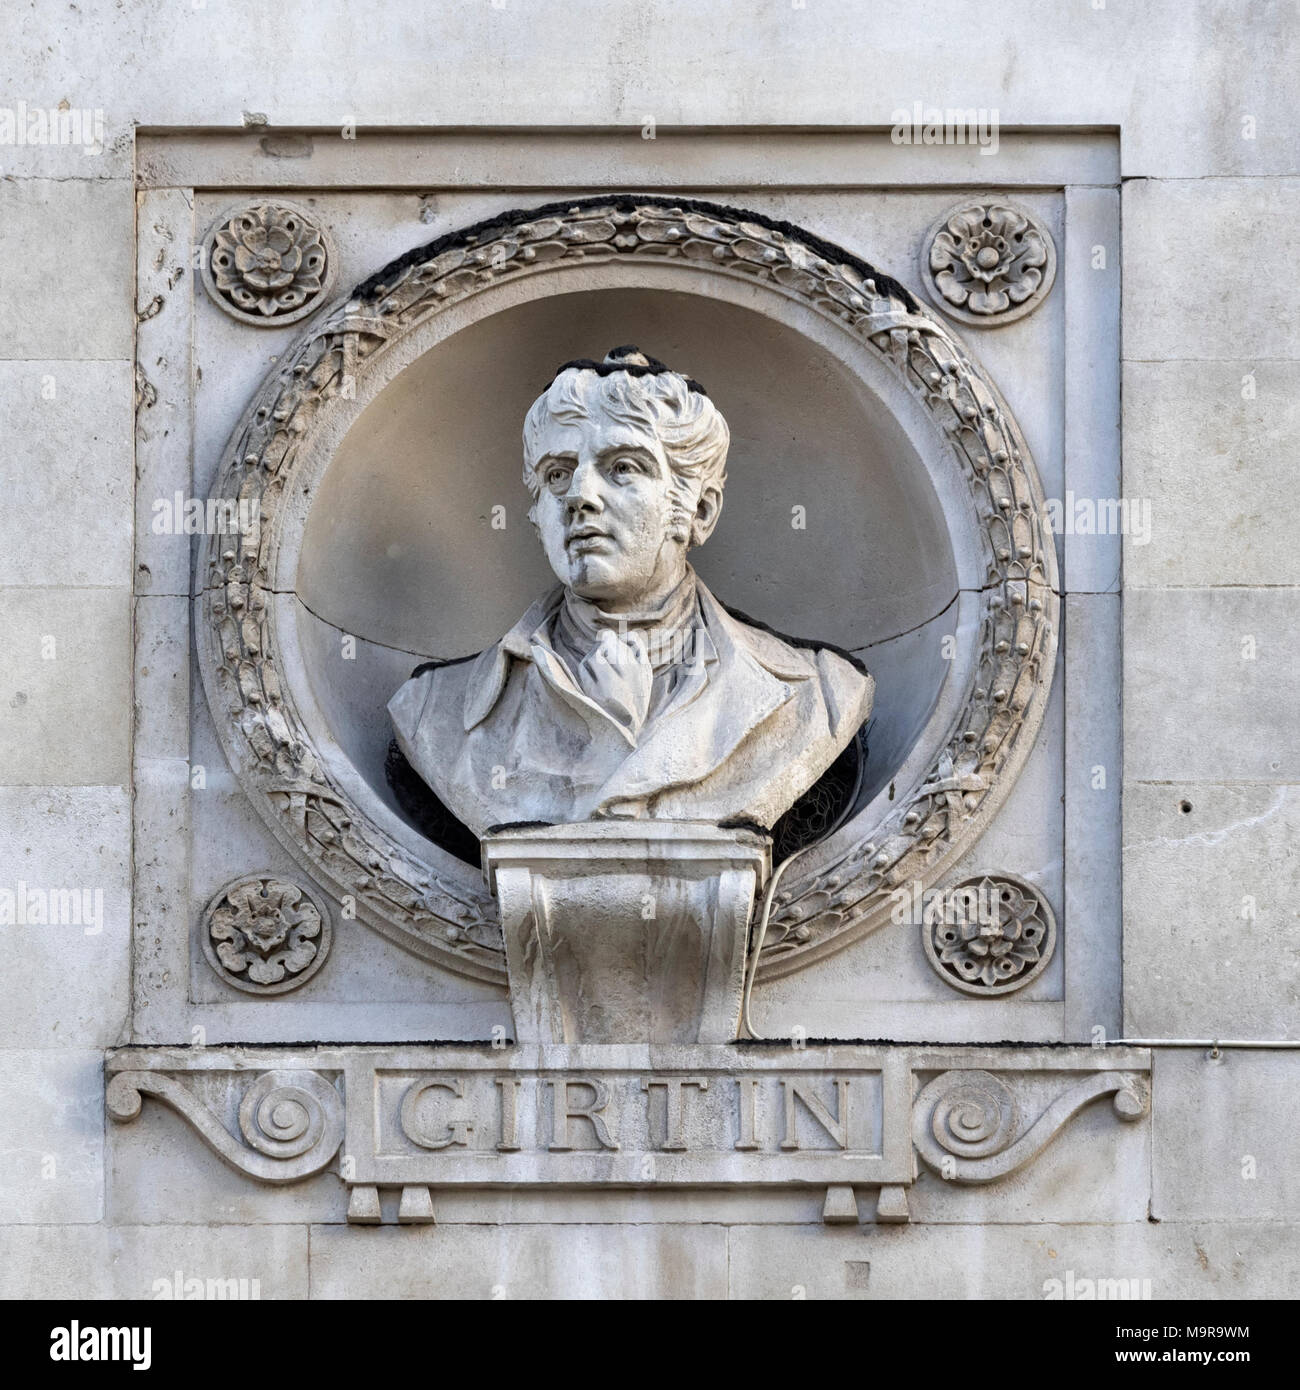 BUST OF THOMAS GIRTIN (1775-1802) : On the outside of the Royal Institute of Painters in Water Colour Building in Piccadilly, London Stock Photo